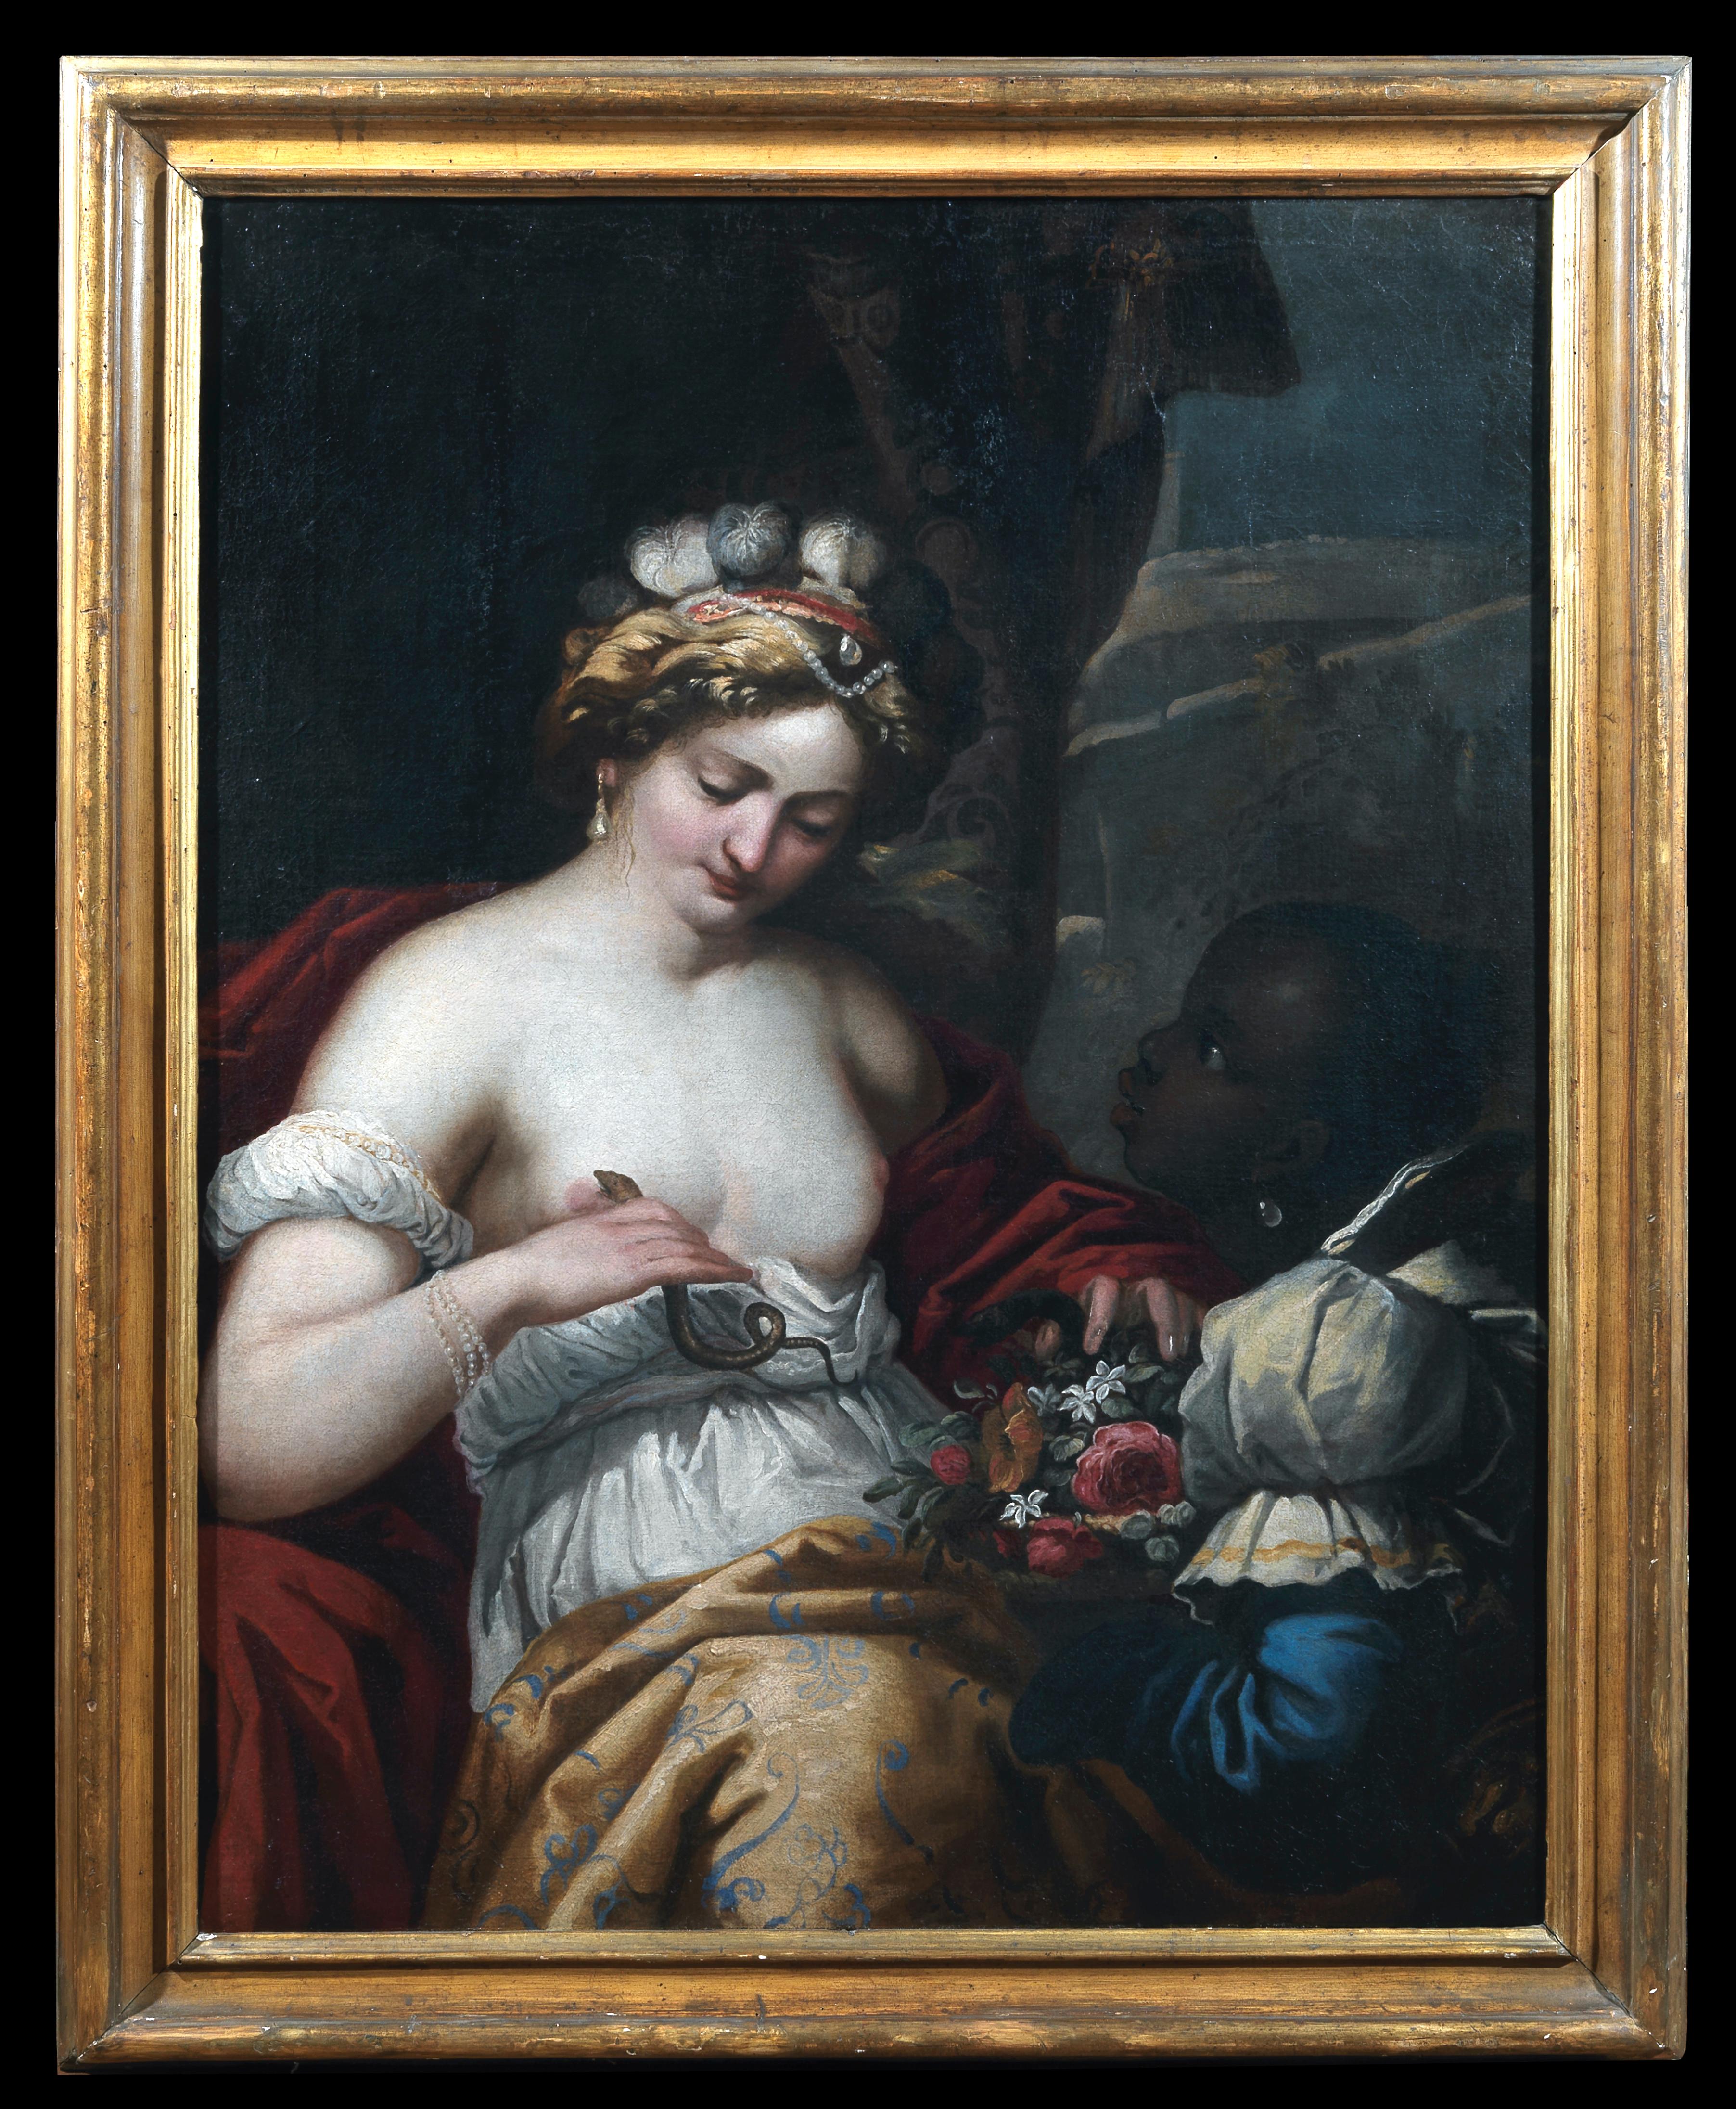 Amazing painting of Cleopatra  oil on canvas with a gilt wood frame. 
Attributed to Giuseppe Diamantini (Fossombrone 1621-Venice 1705)
The dramatic subject of the painting depicts the final moments in the life of the Egyptian Queen, Cleopatra, as